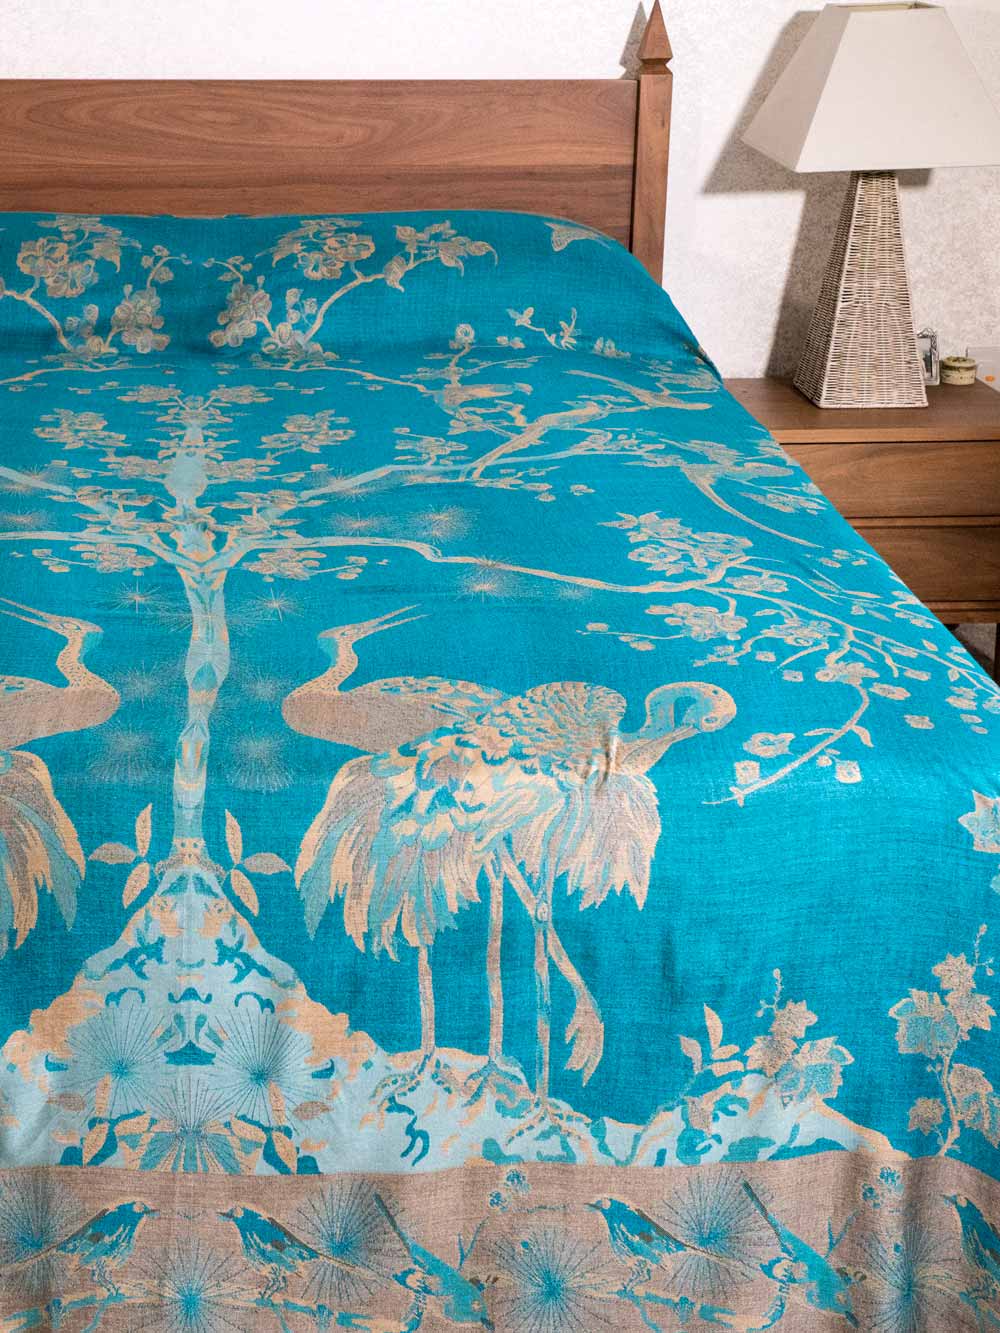 Turquoise & Gold Tree of Life Indian Bedspread